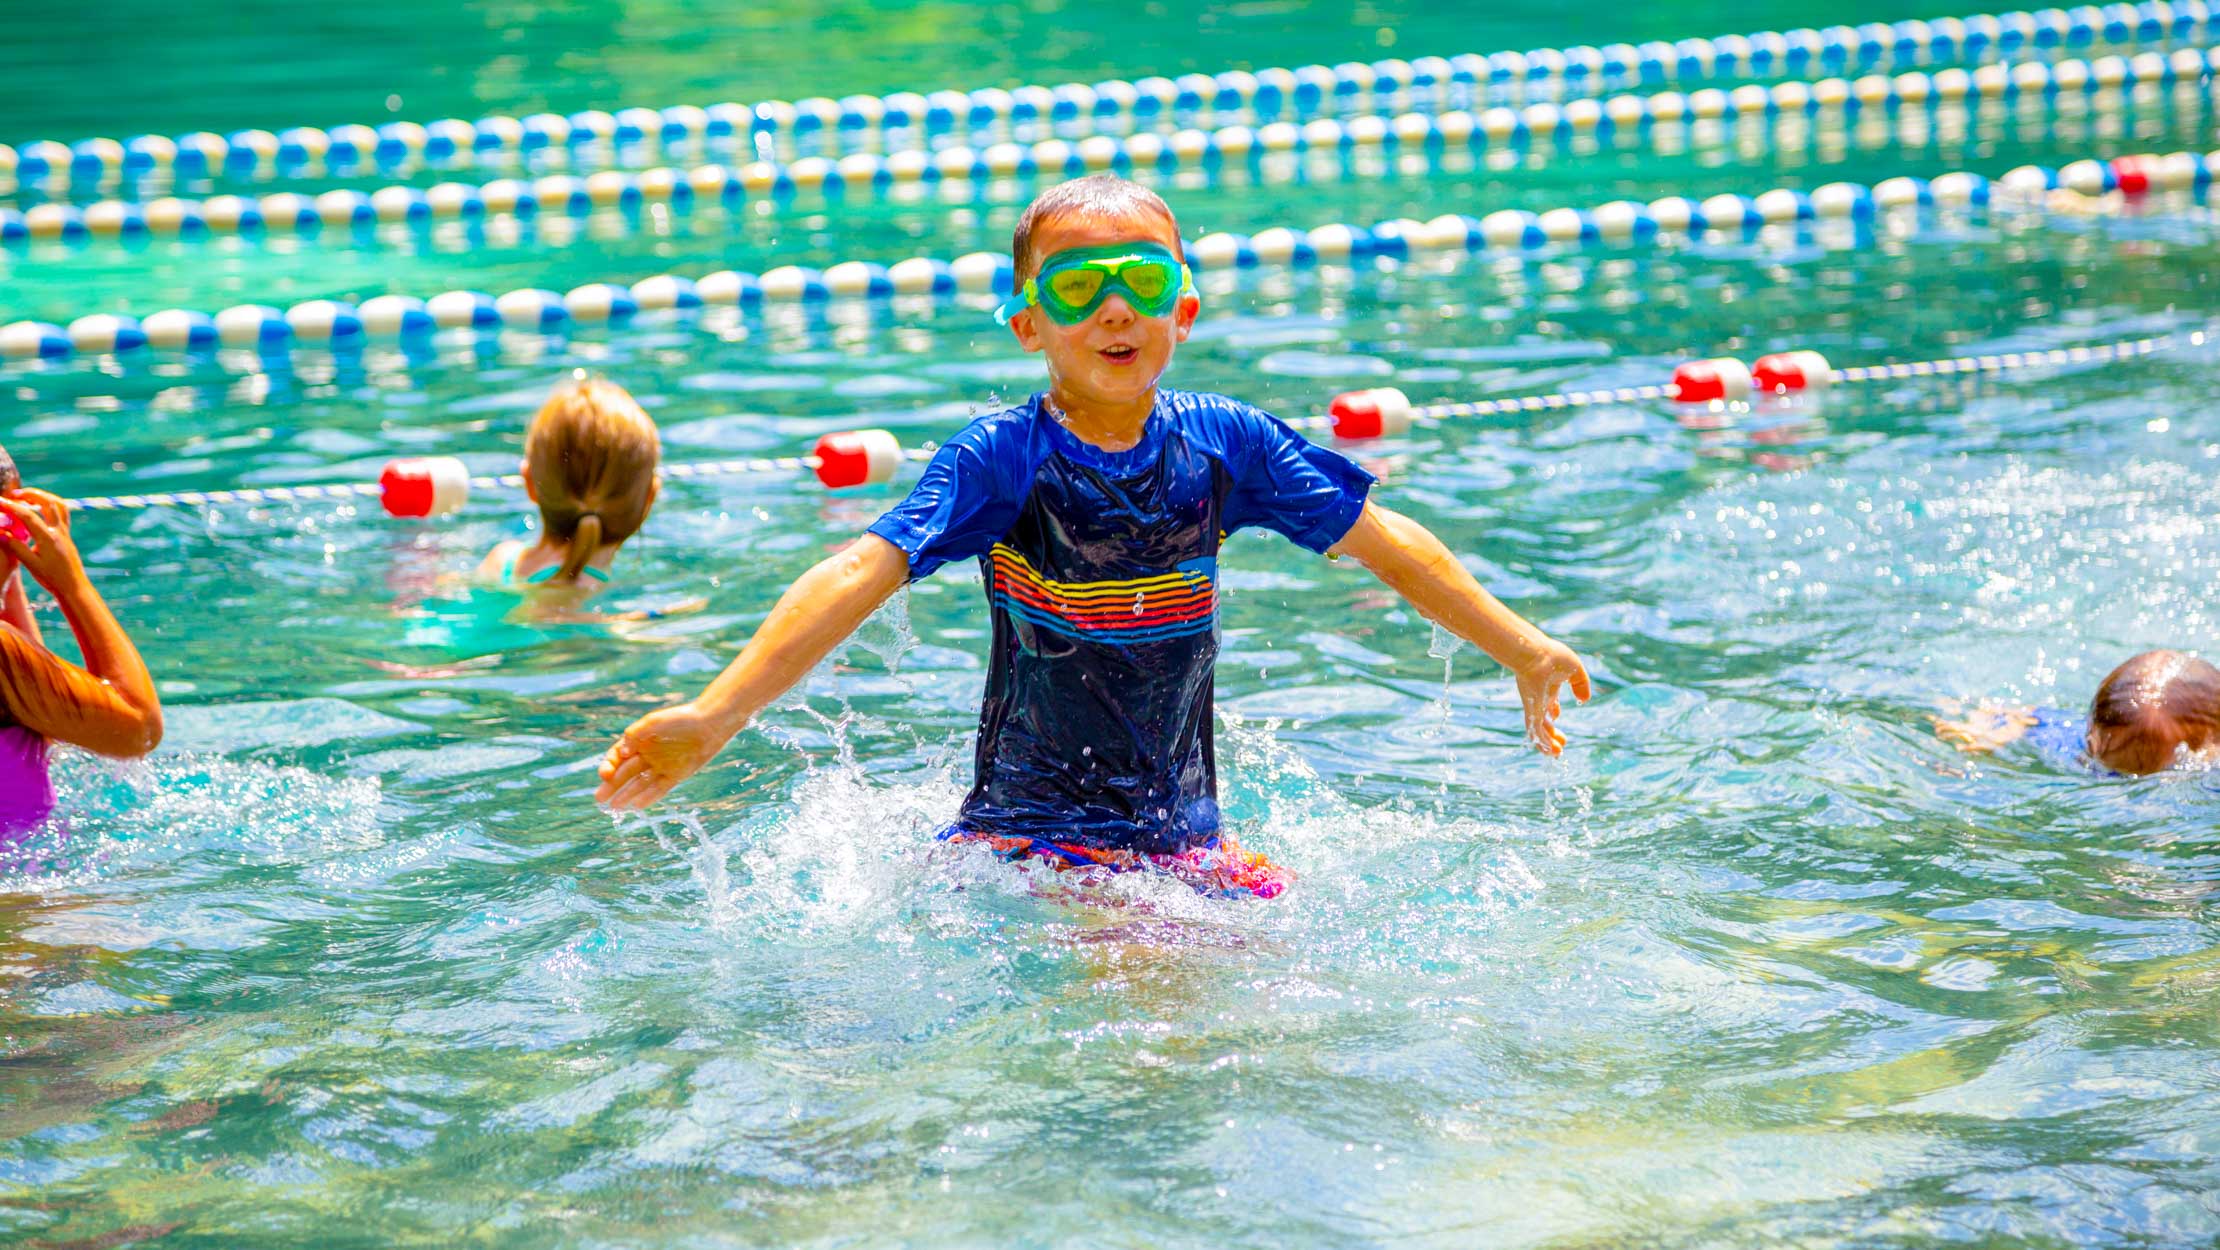 Boy in the pool with goggles